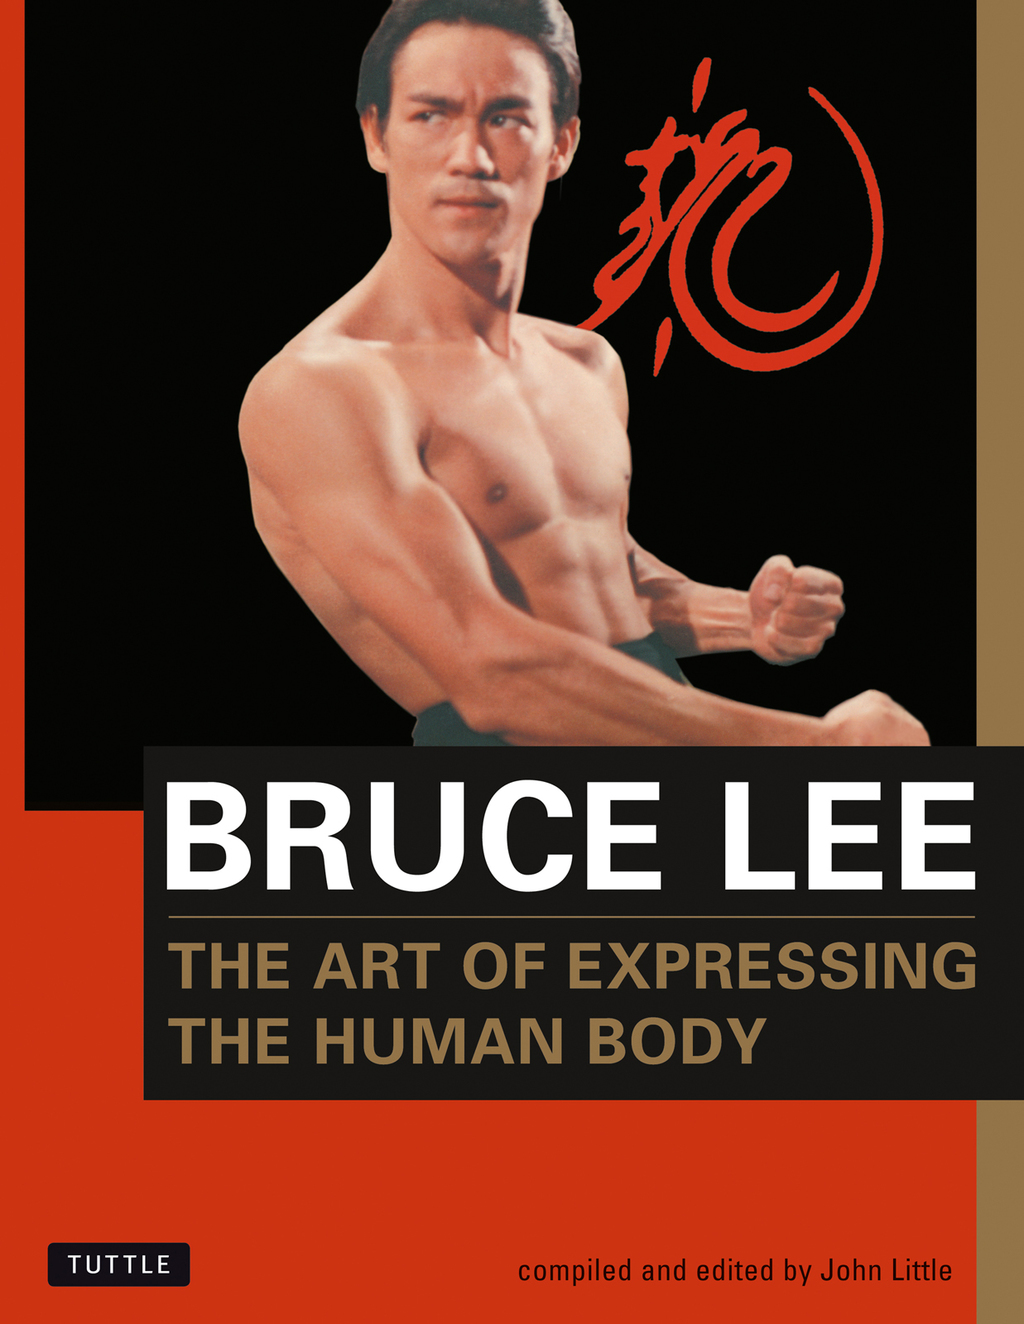 Bruce Lee The Art of Expressing the Human Body (eBook) - Bruce Lee,